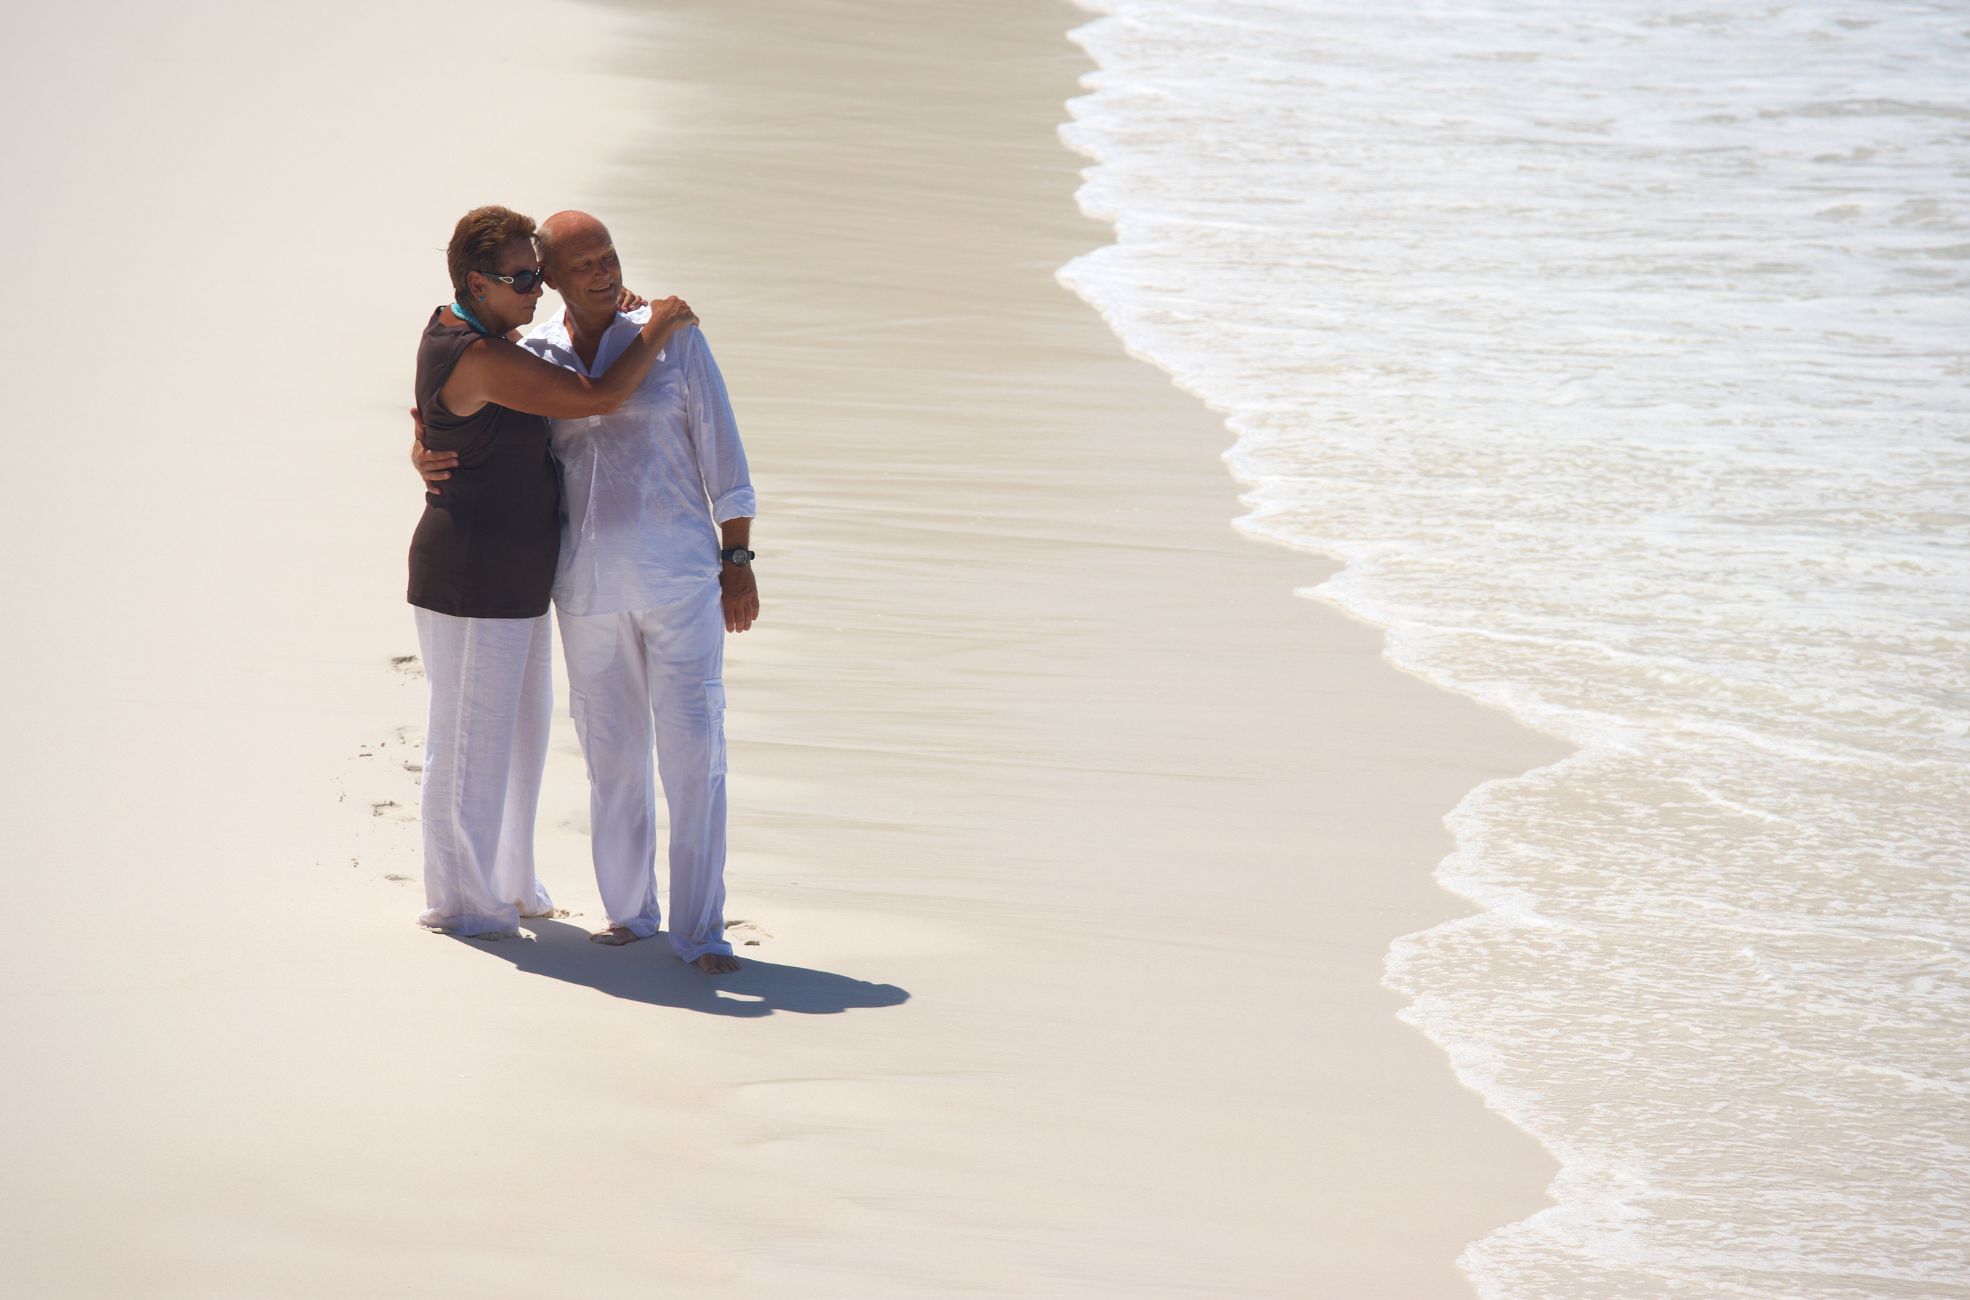 A retired couple looking to retire to the white sandy beaches of the Caribbean islands. 